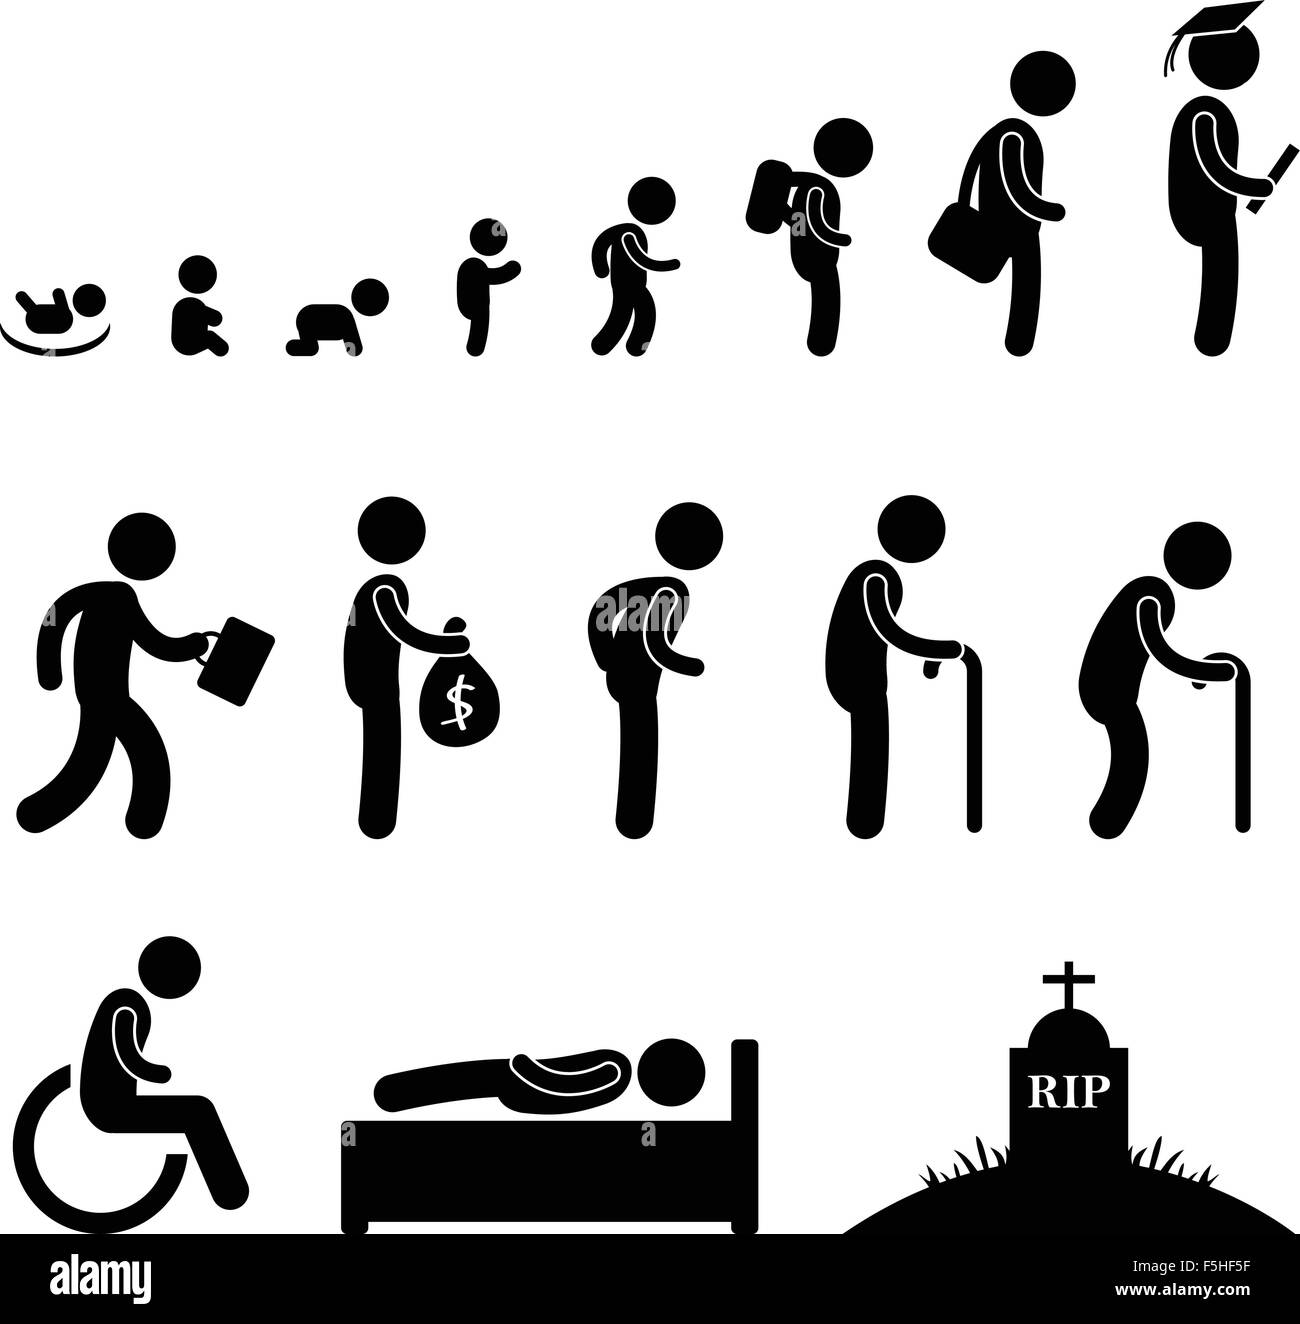 Human Life Baby Child Student Work Old Man Death Stock Vector